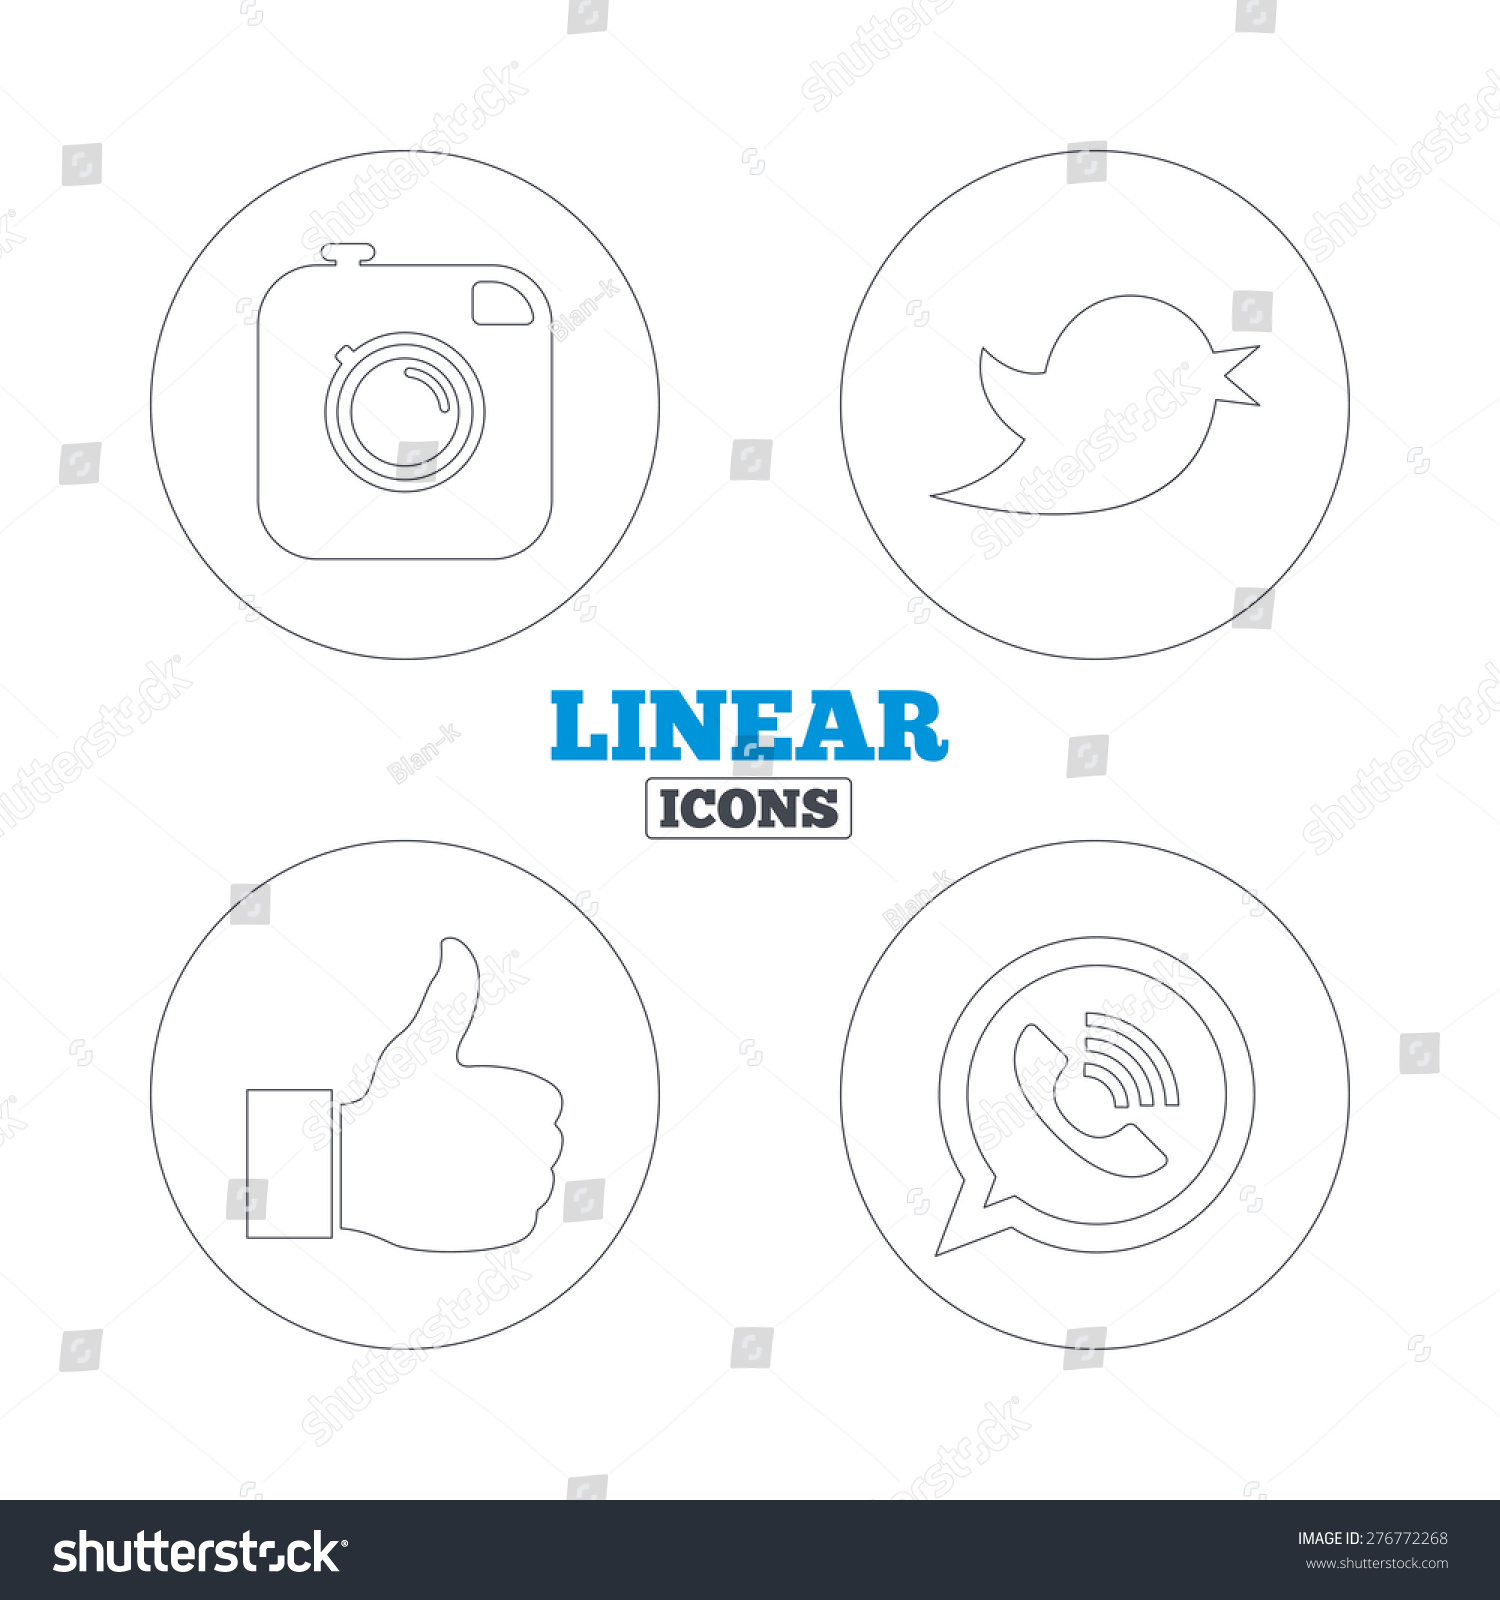 Hipster photo camera icon. thumbs up and Call speech bubble sign. Bird symbol. Social media icons. Linear outline web icons. Vector #276772268